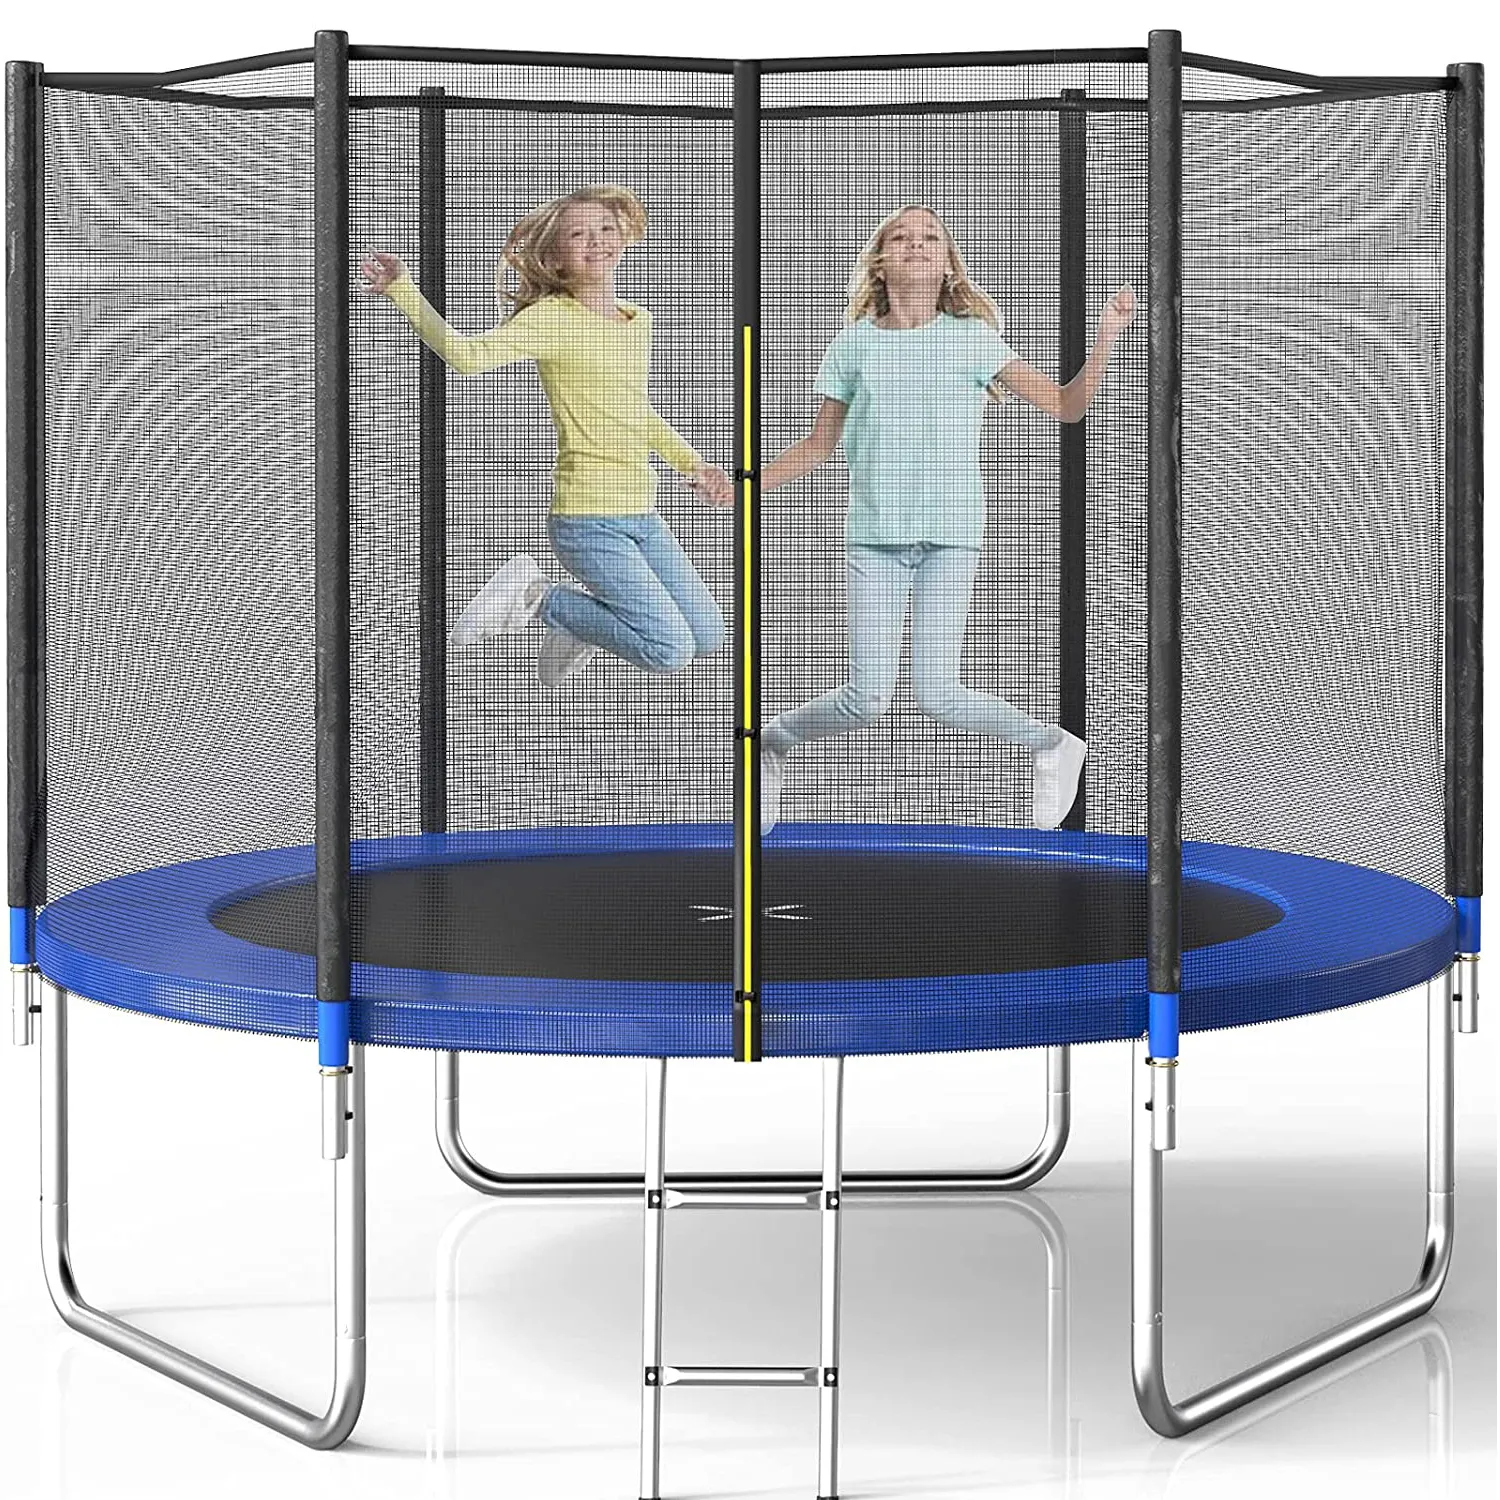 Combo Bounce Jump Trampoline with Spring Pad Waterproof Jump Mat & Ladder Enclosure Net Outdoor Trampoline for Kids and Adults